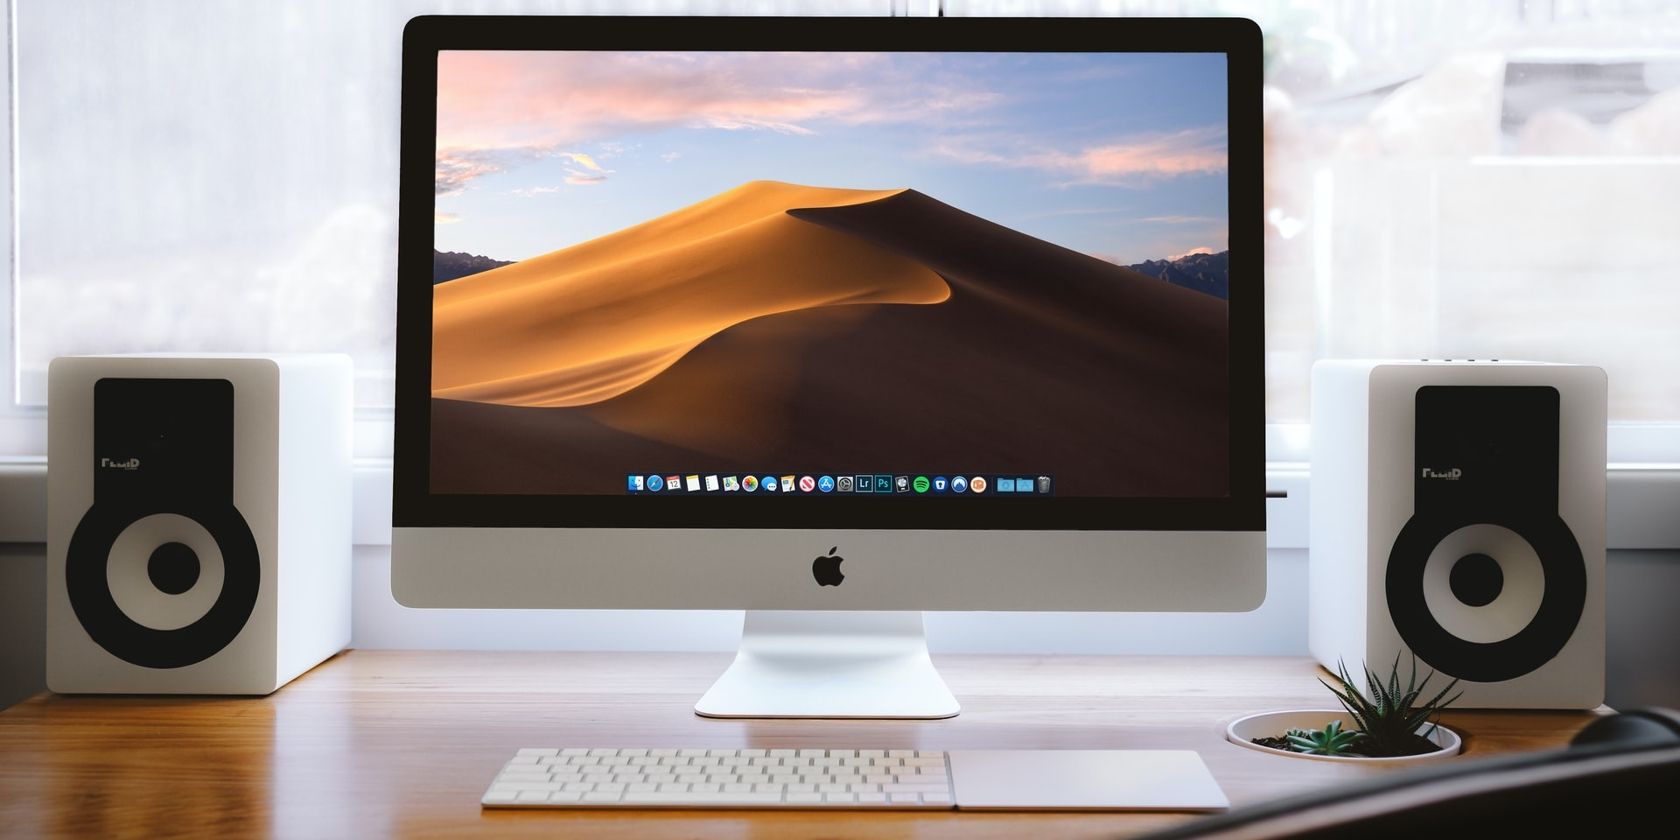 iMac on desk with speakers